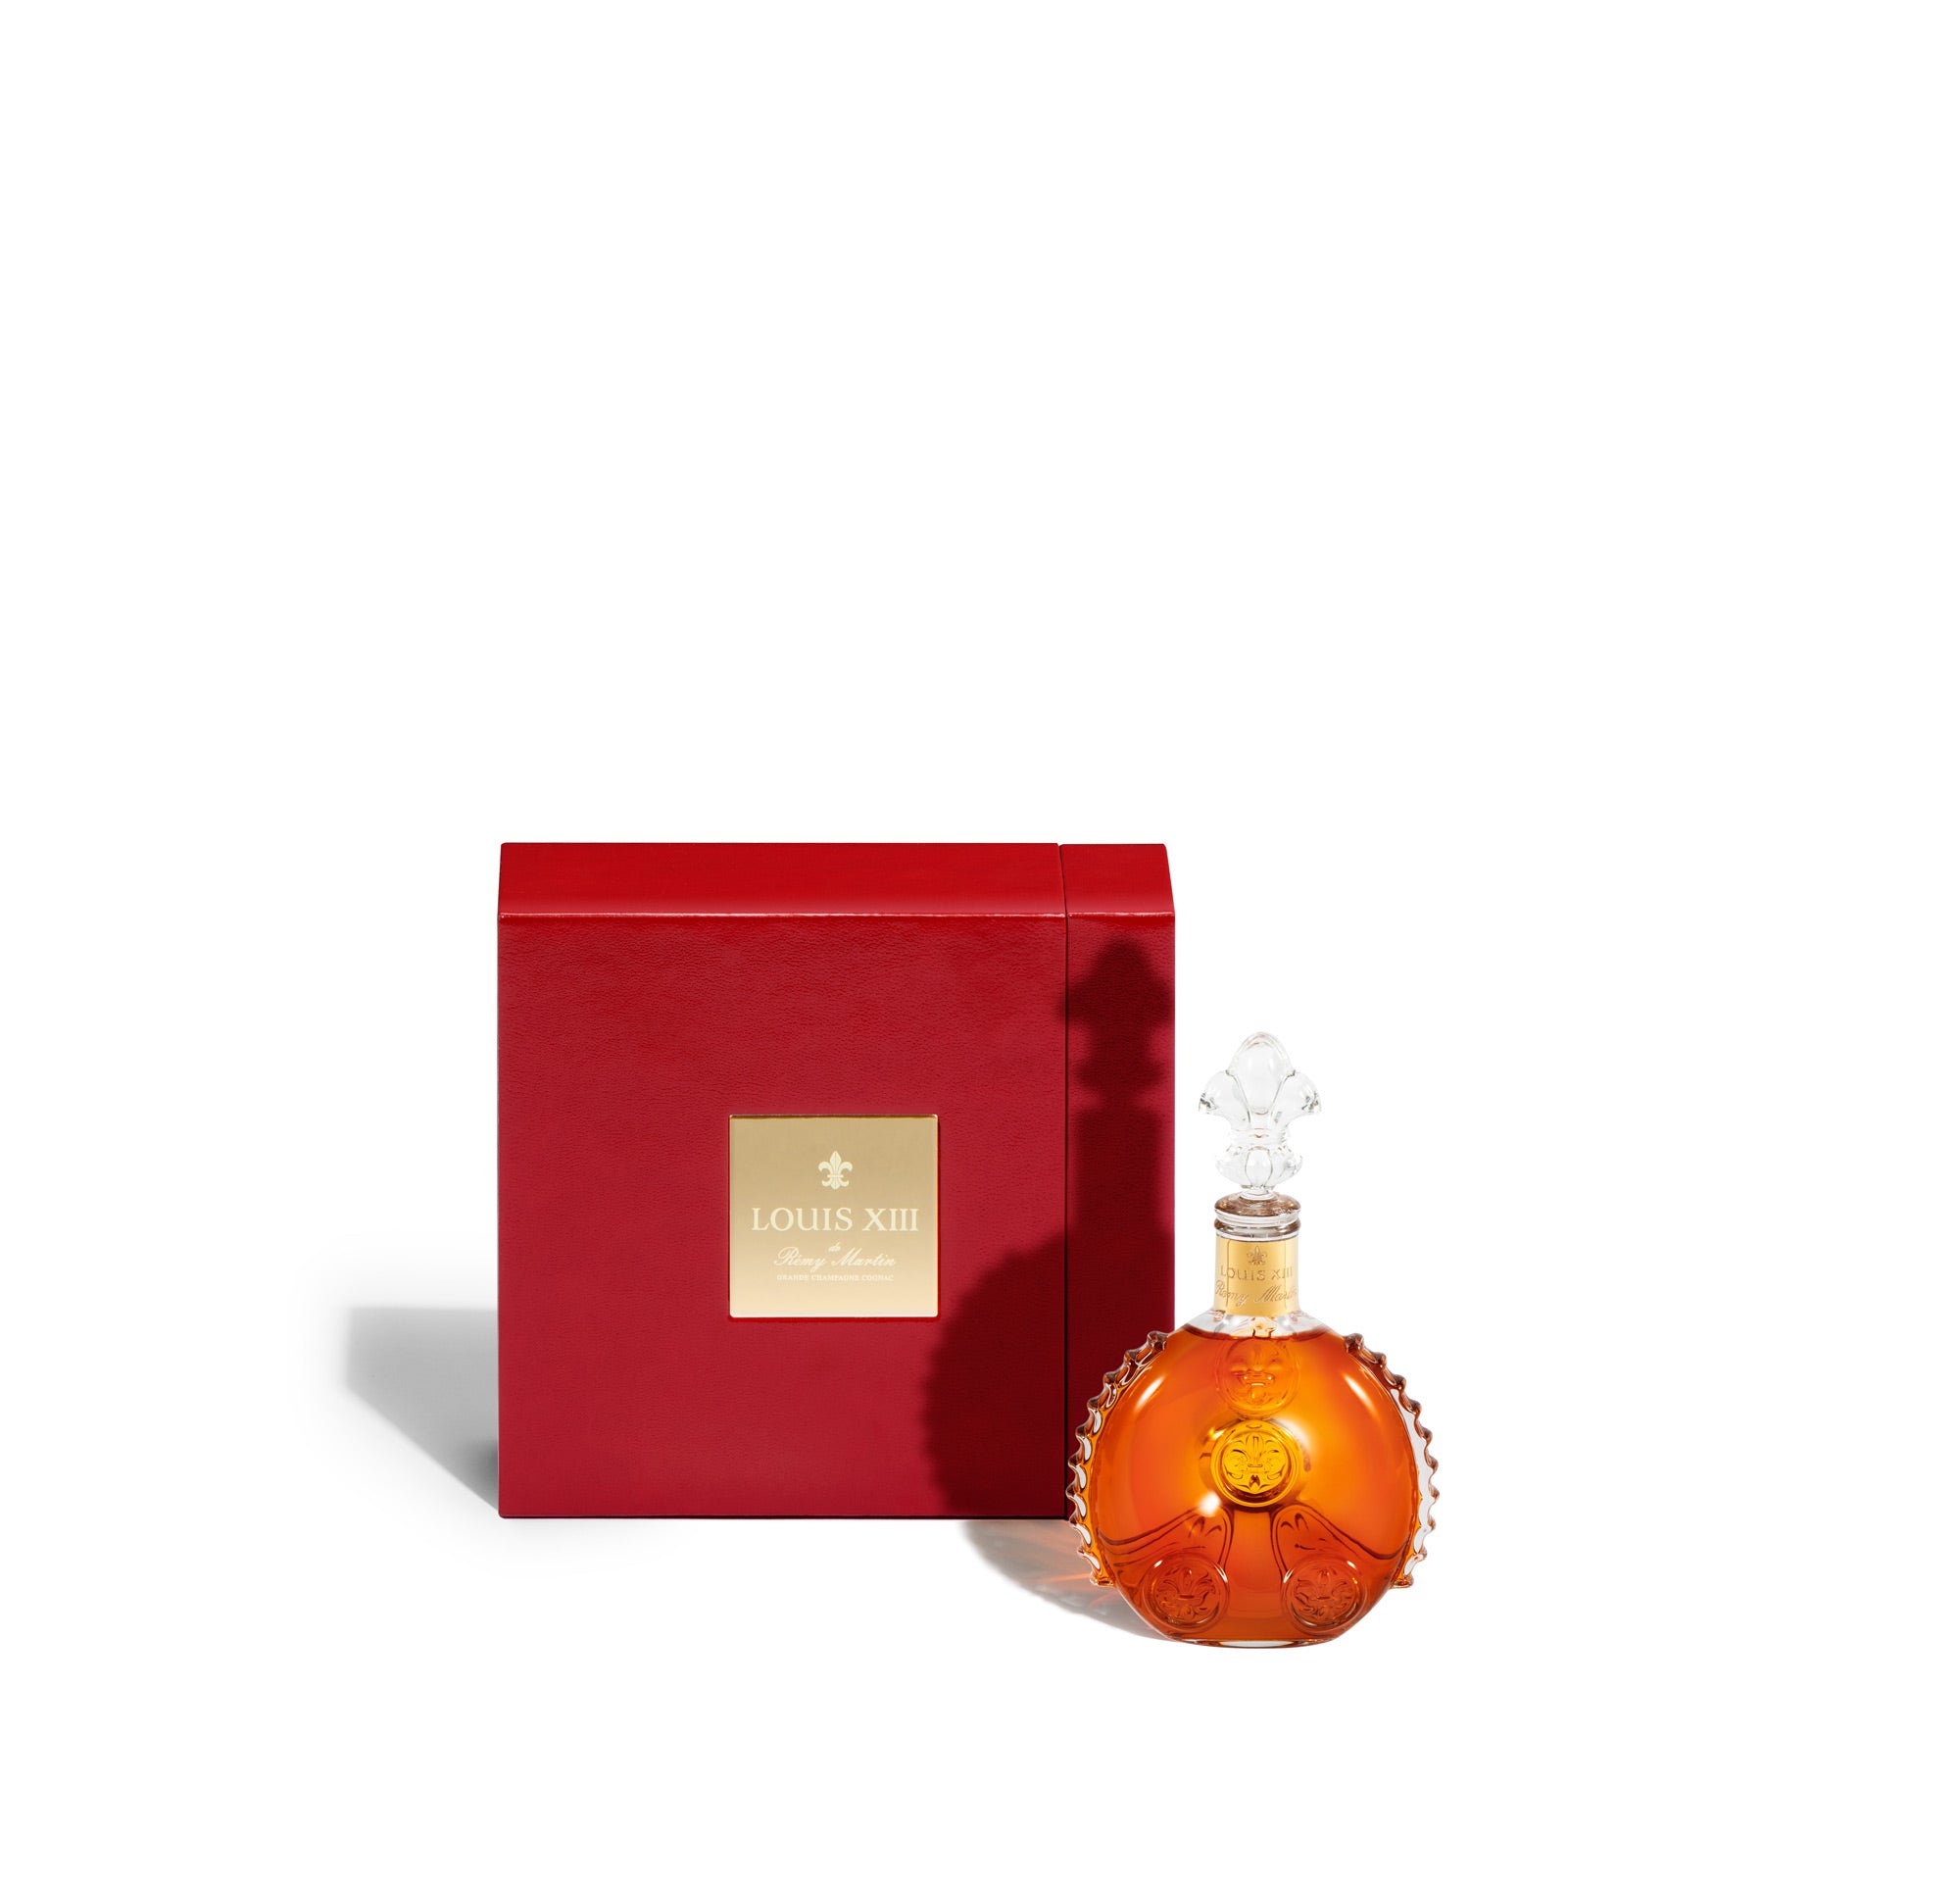 Introducing The Crown Jewel LOUIS XIII RARE CASK 42.1, Poured